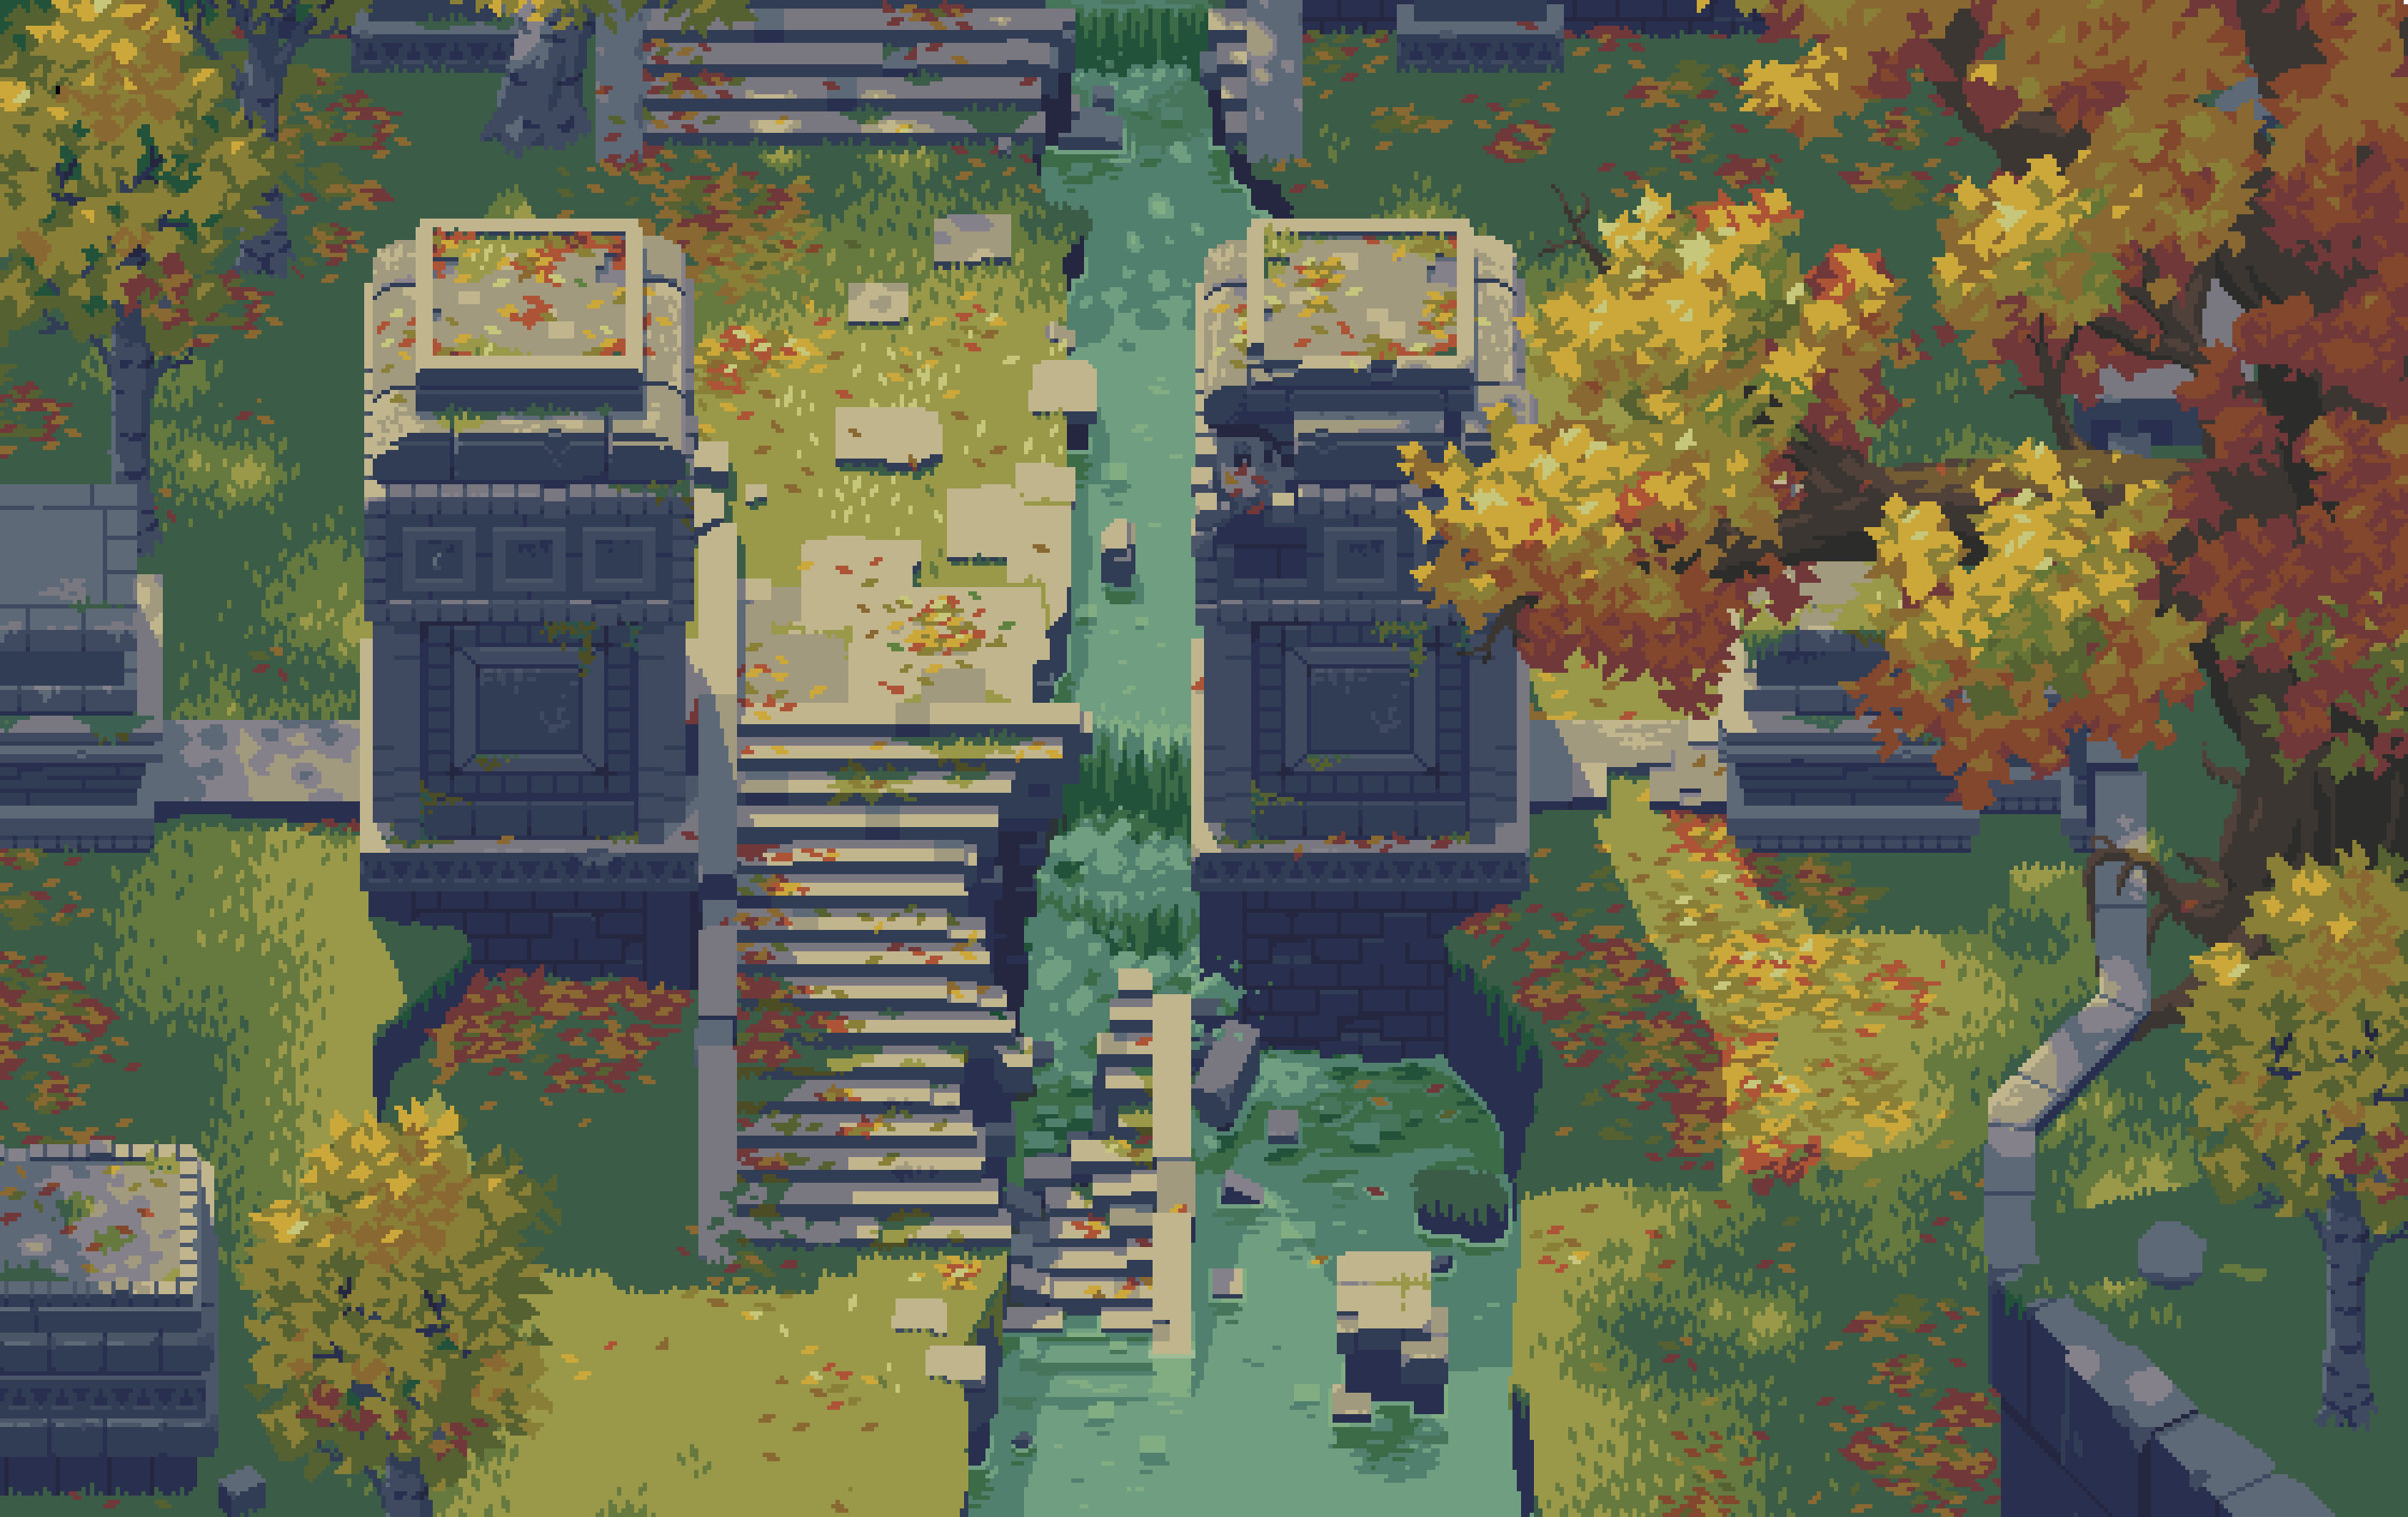 A pixel art image of a city with a bridge, trees, and ruins. - Pixel art